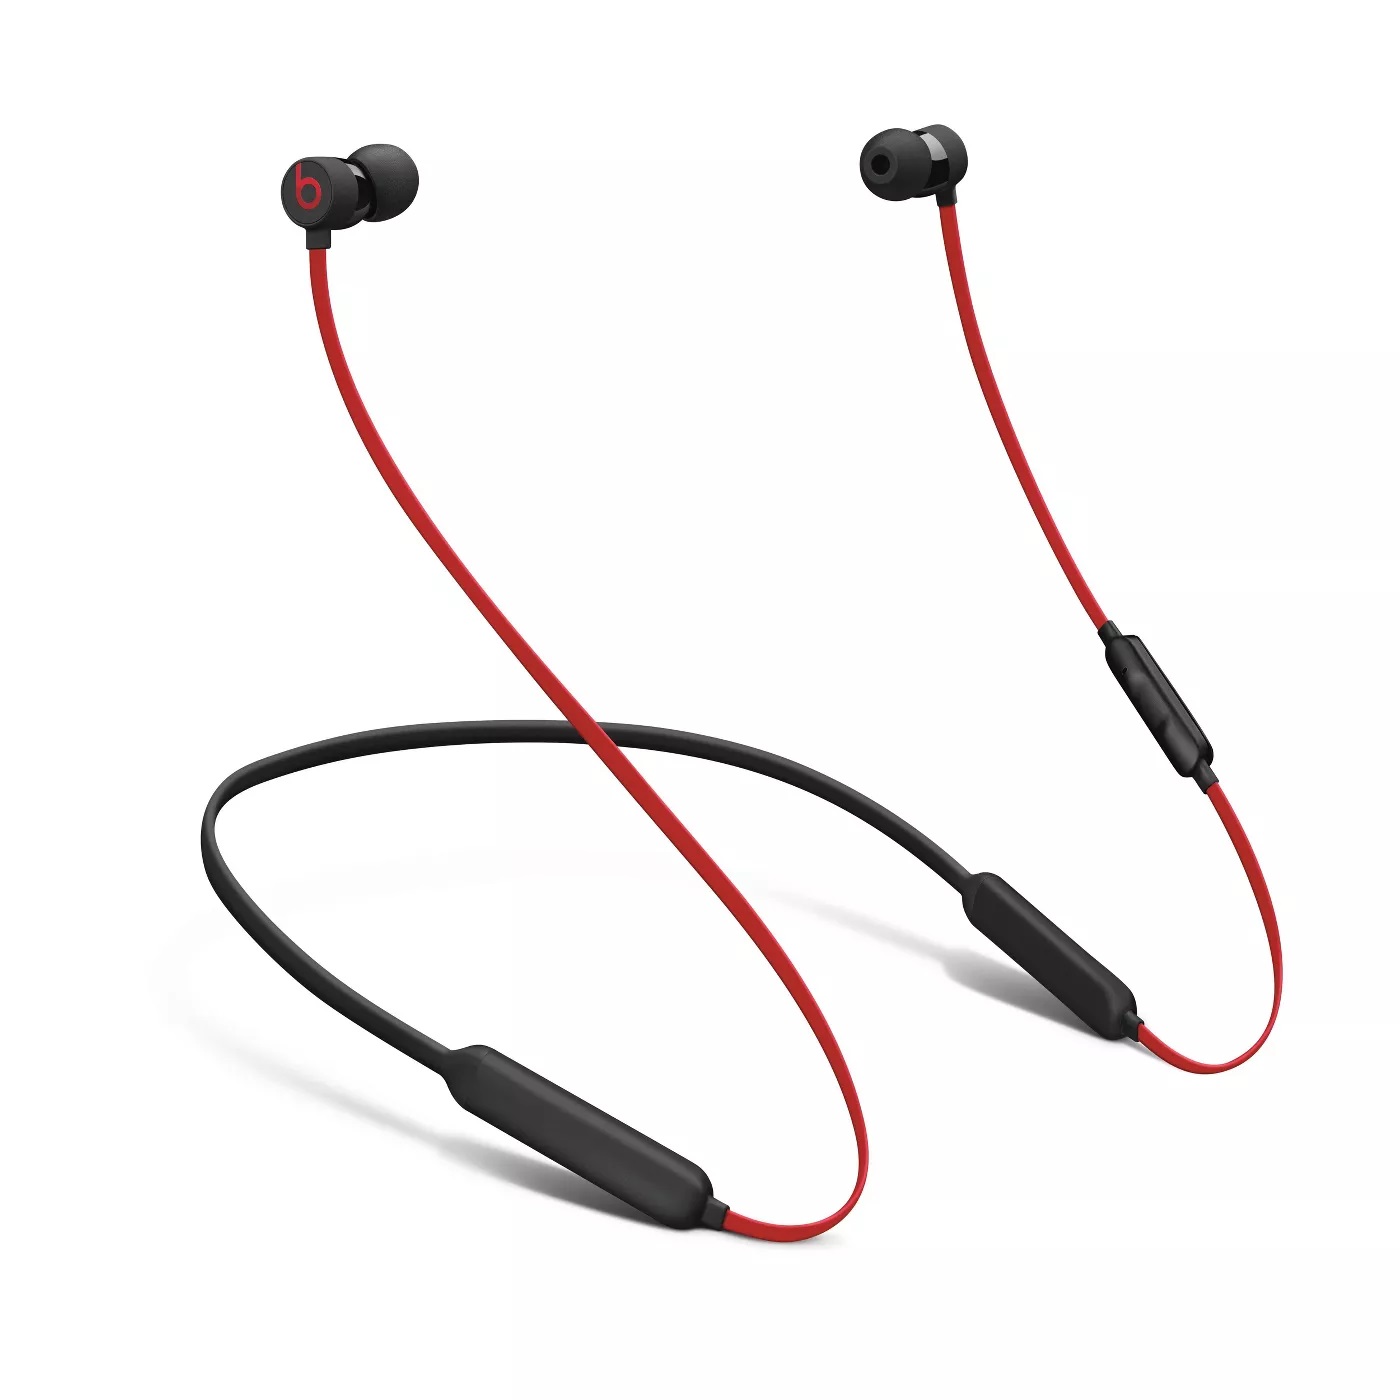 Restored Beats by Dr. Dre BeatsX Defiant Black/Red In Ear Headphones MX7X2LL/A (Refurbished) - image 1 of 3